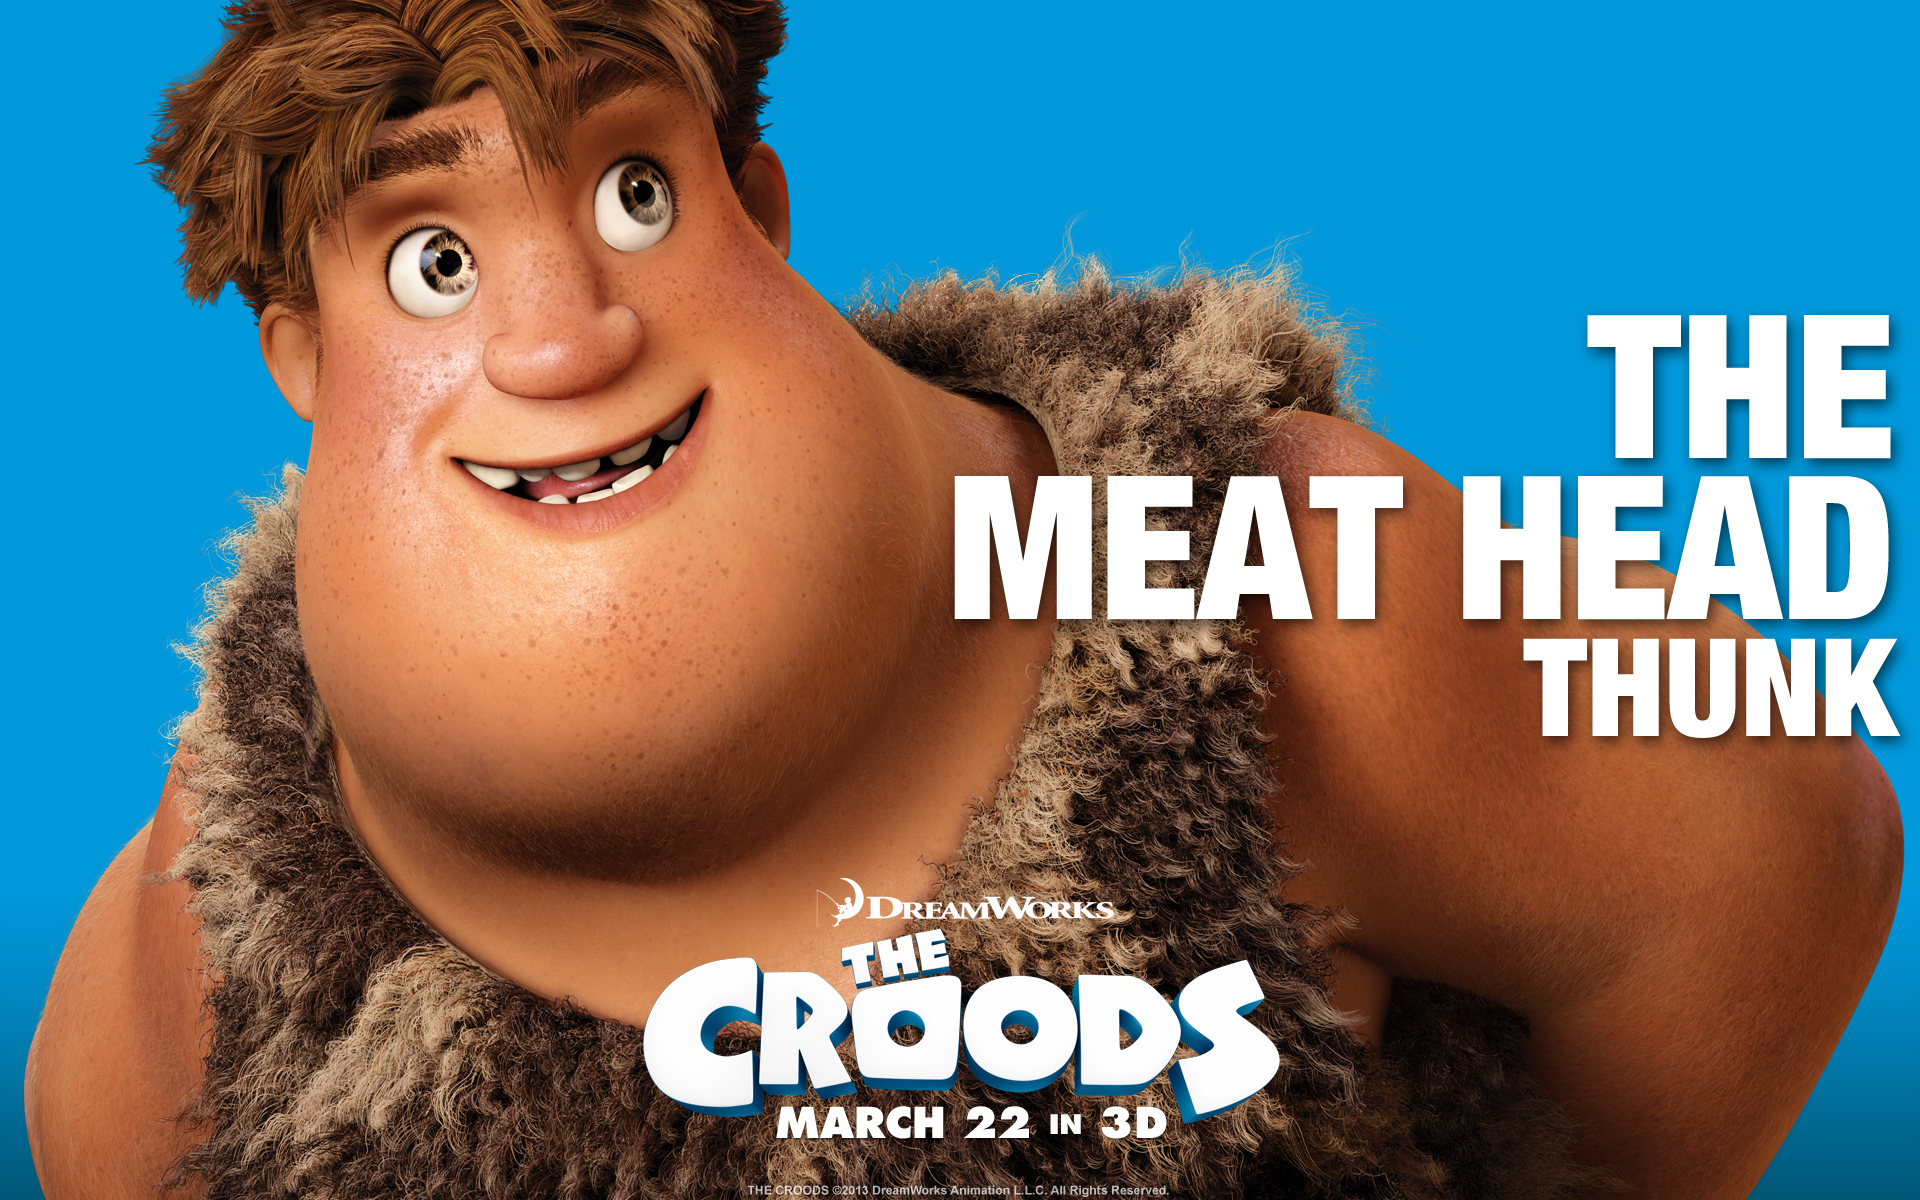 movie, the croods, thunk (the croods)